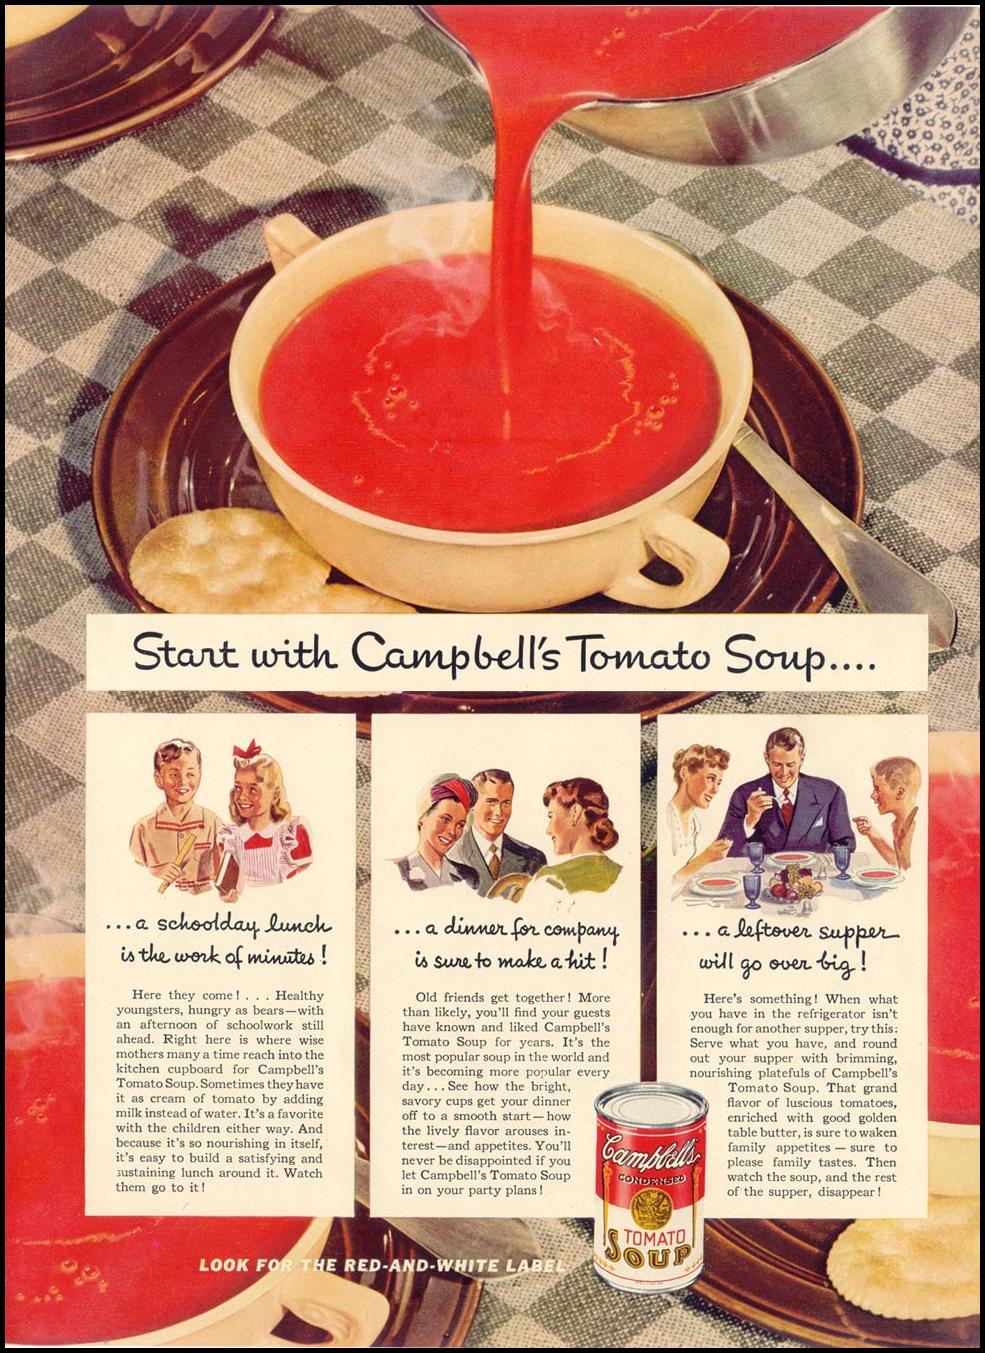 CAMPBELL'S SOUP
LIFE
10/13/1941